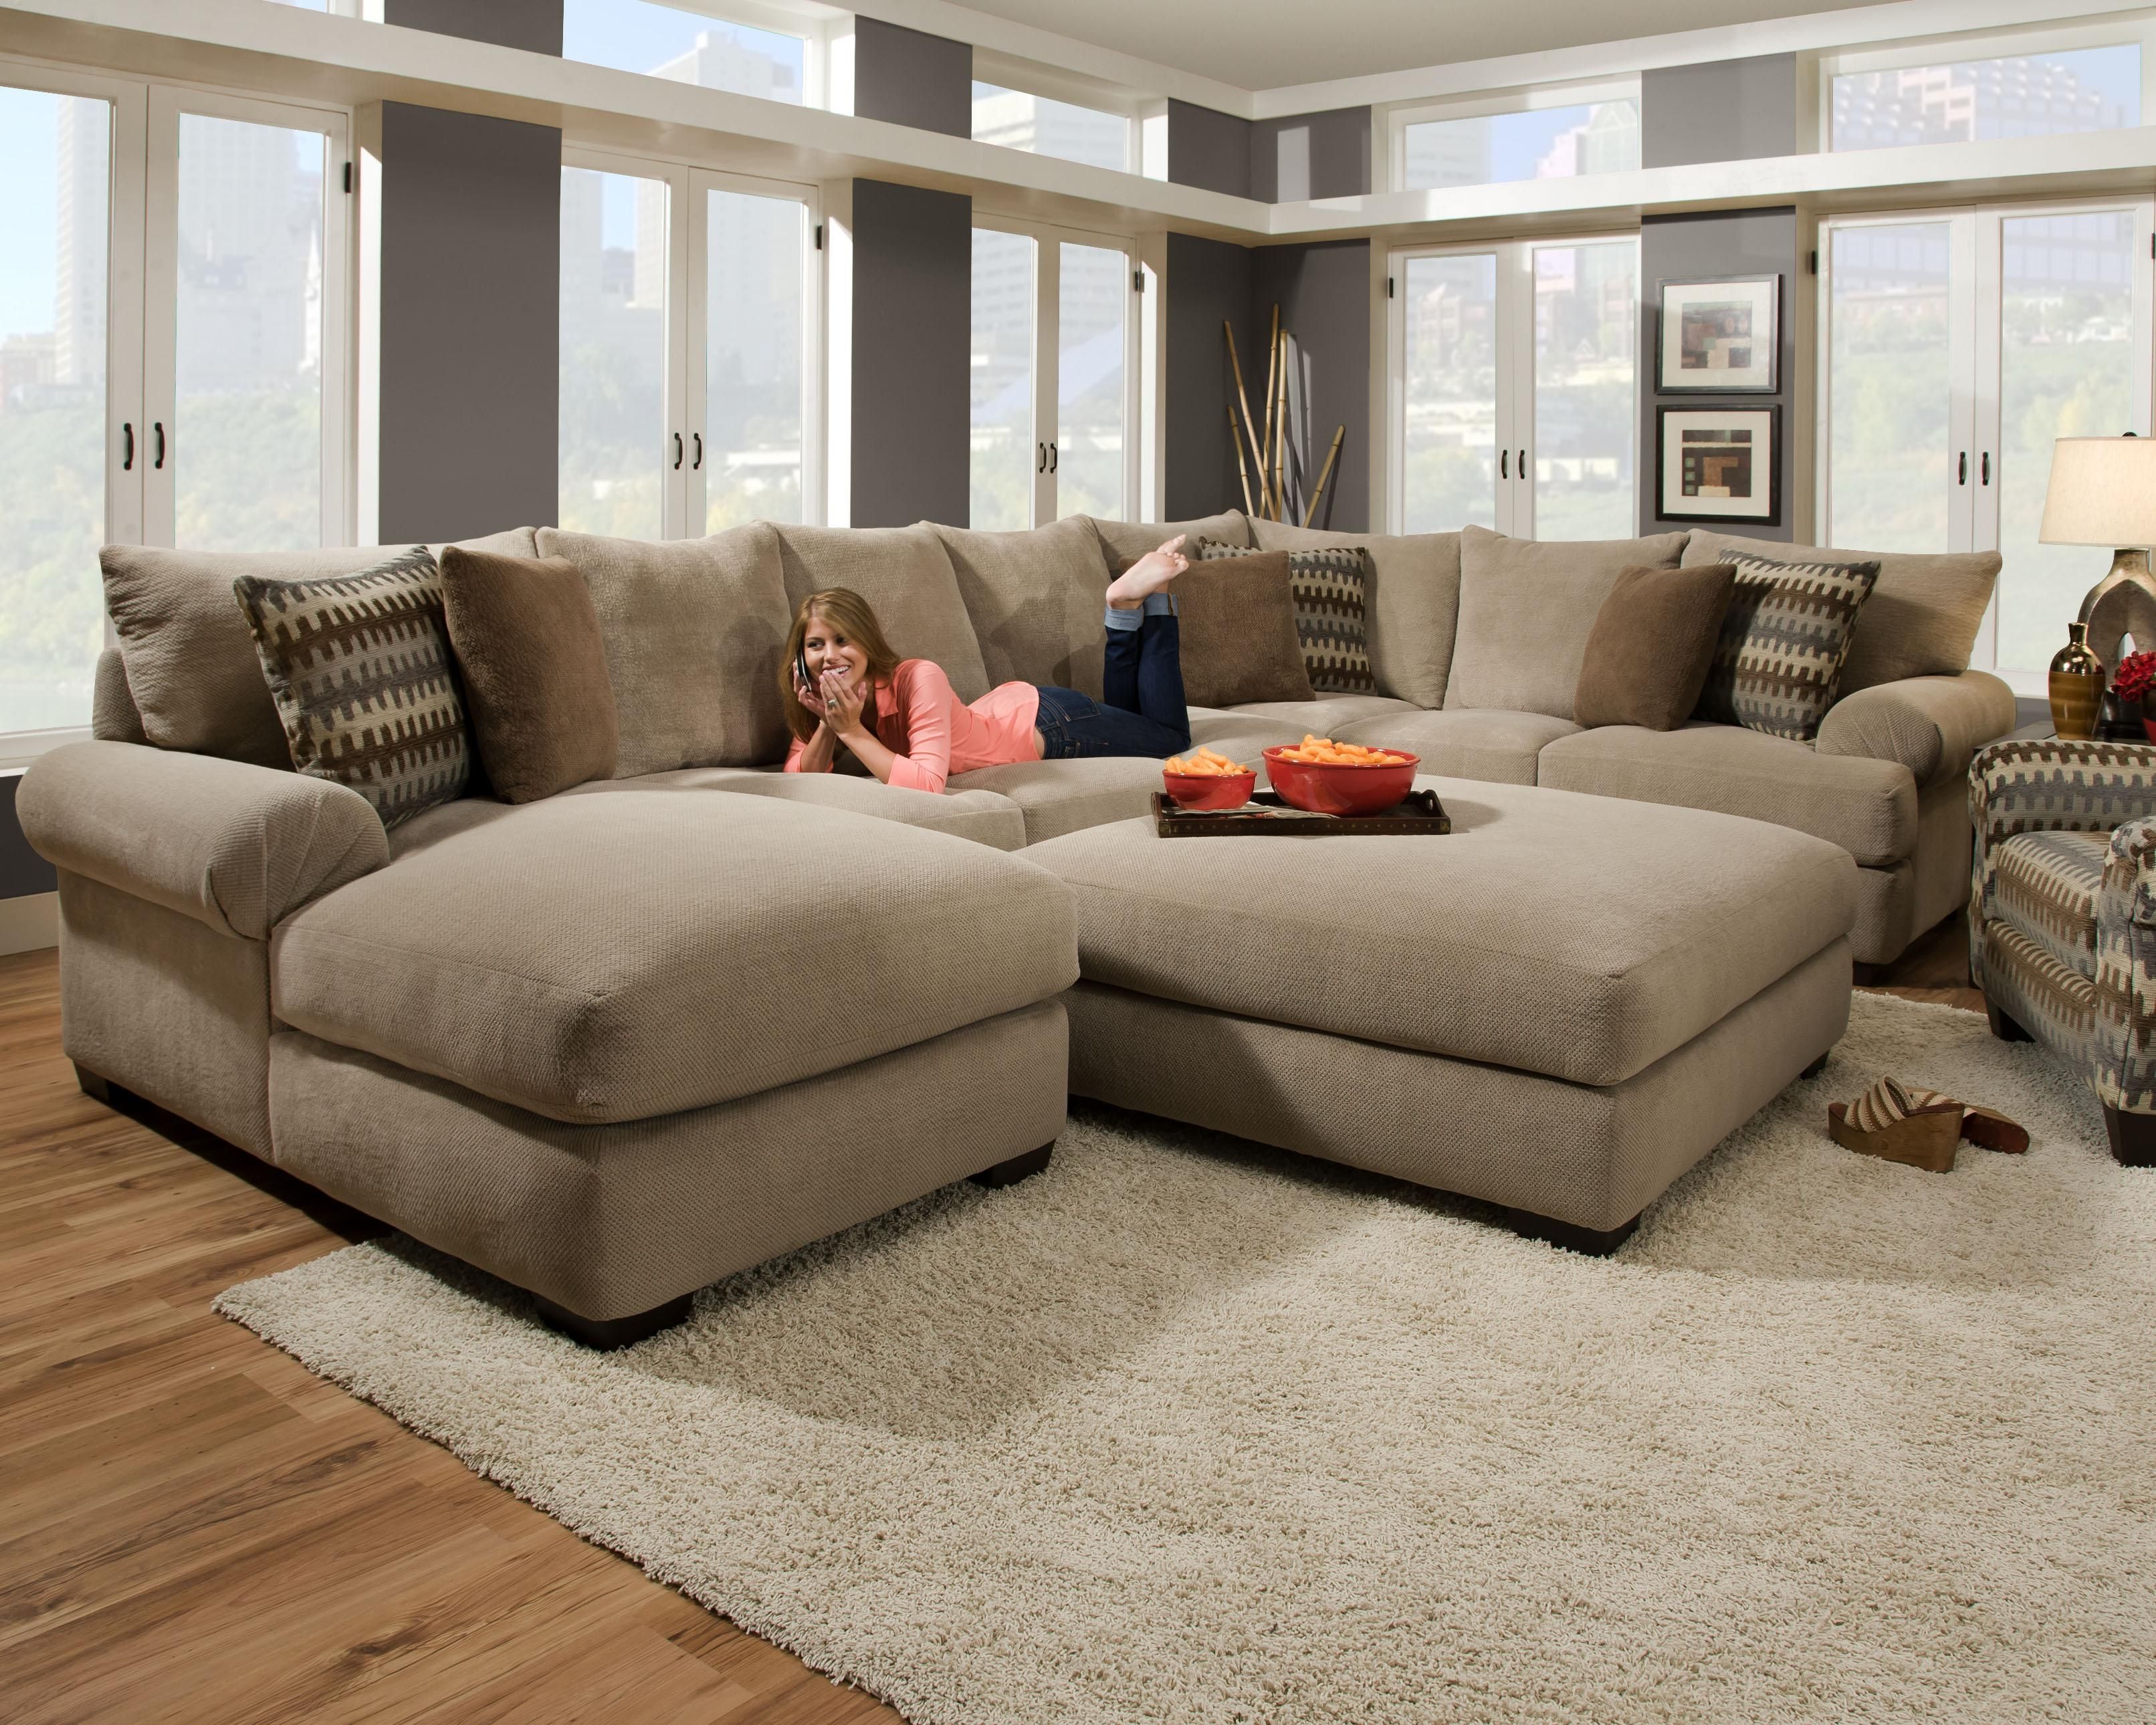 Comfy Sectional Sofas Tourdecarroll Throughout Comfy Sectional Sofa (View 2 of 15)